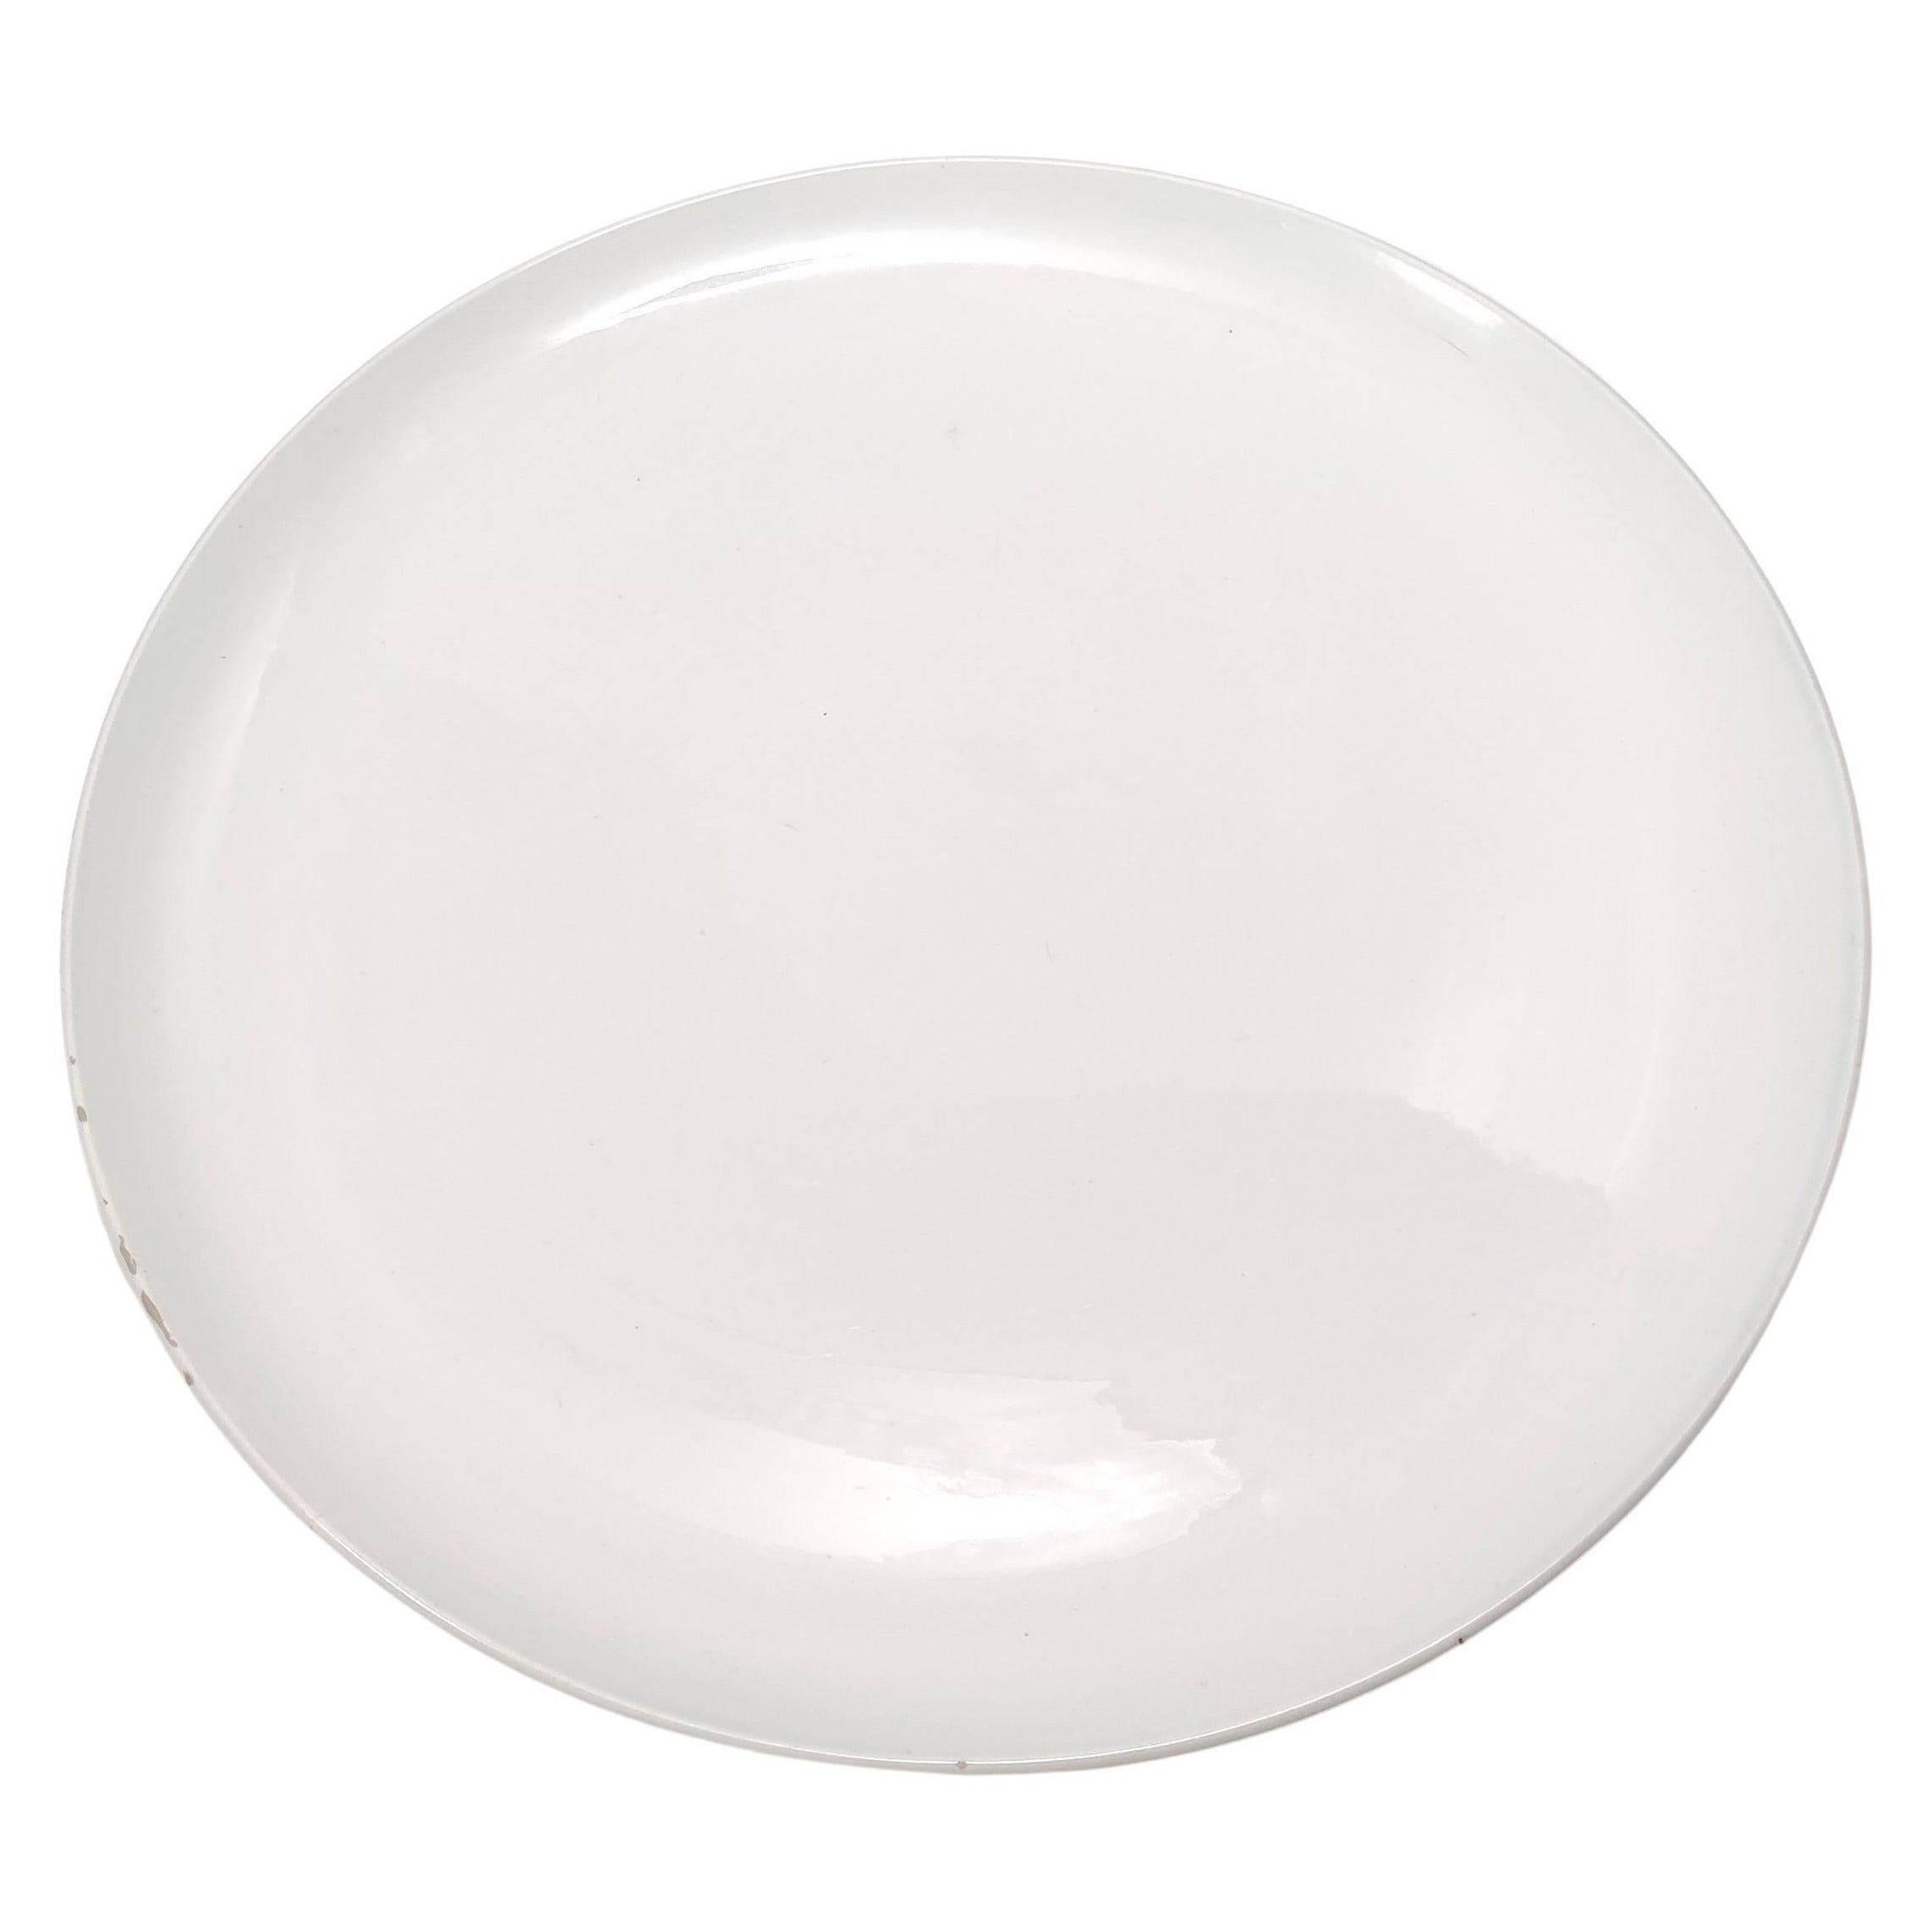 White Lacquered Ceramic Dessert Plate by Ginori Ascribable to Gio Ponti, Italy For Sale